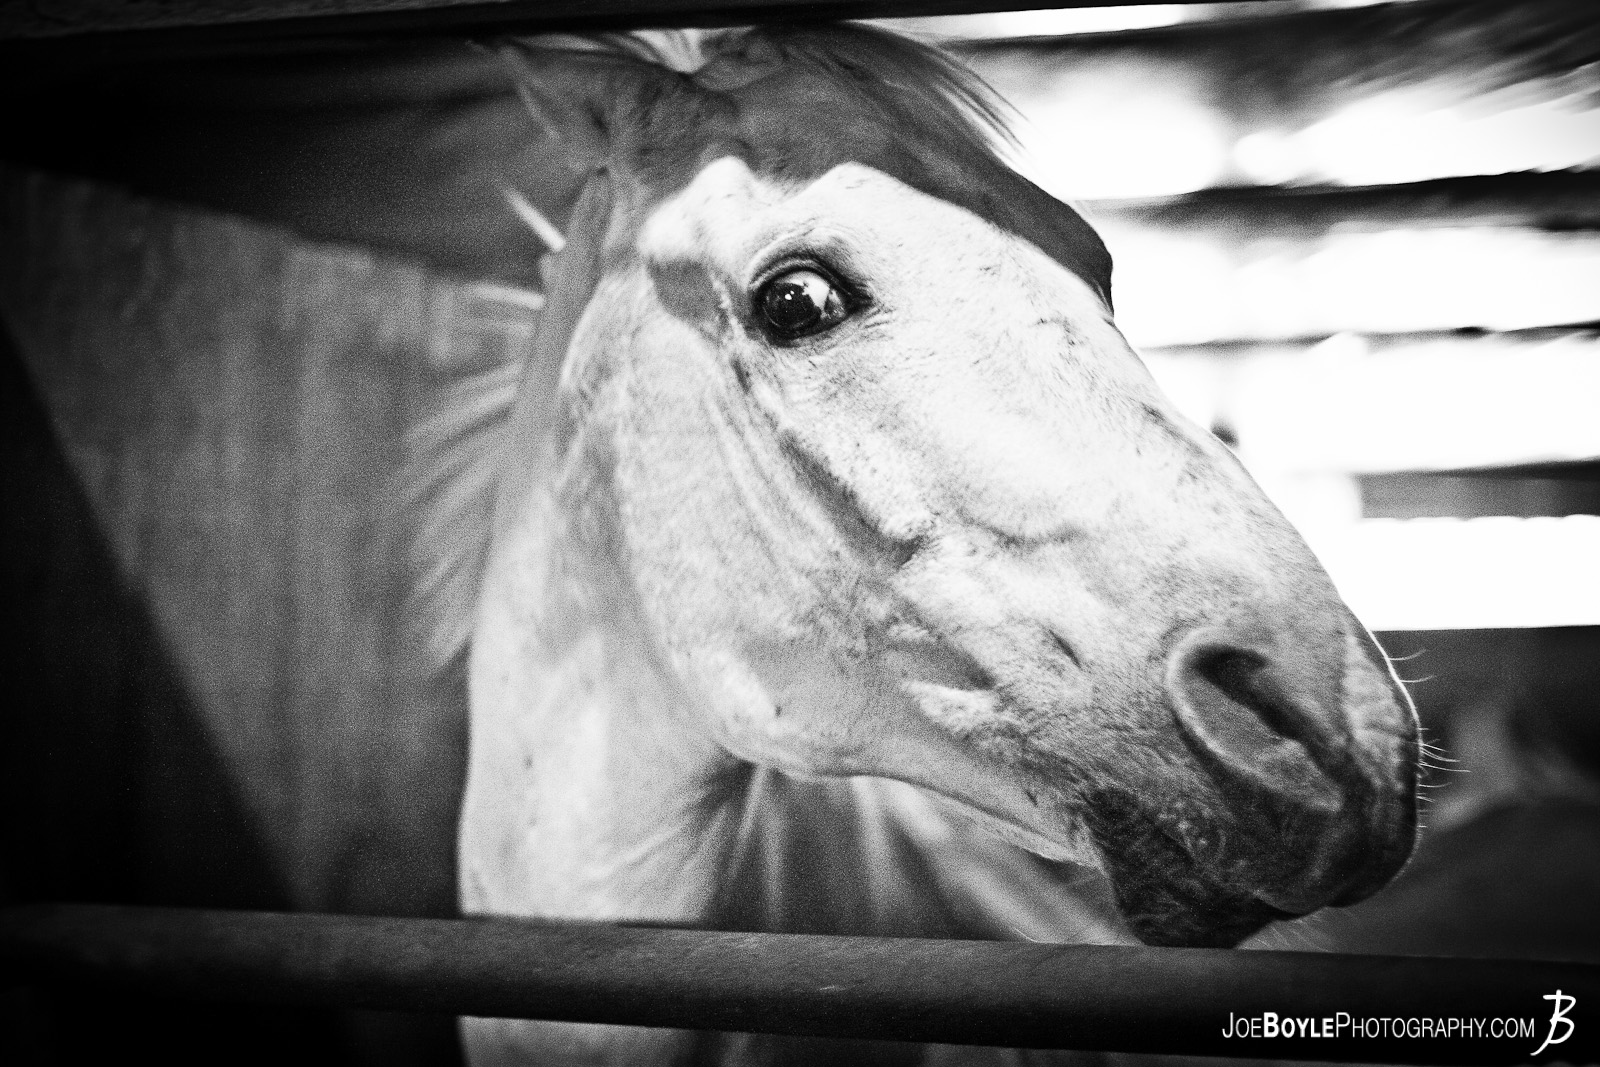   While at "Neigh Day" presented by Diamonds in the Rough Horses (Equine) Rescue Shelter this particular horse was very inquisitive of me and I was able to capture a photo of his attitude. 